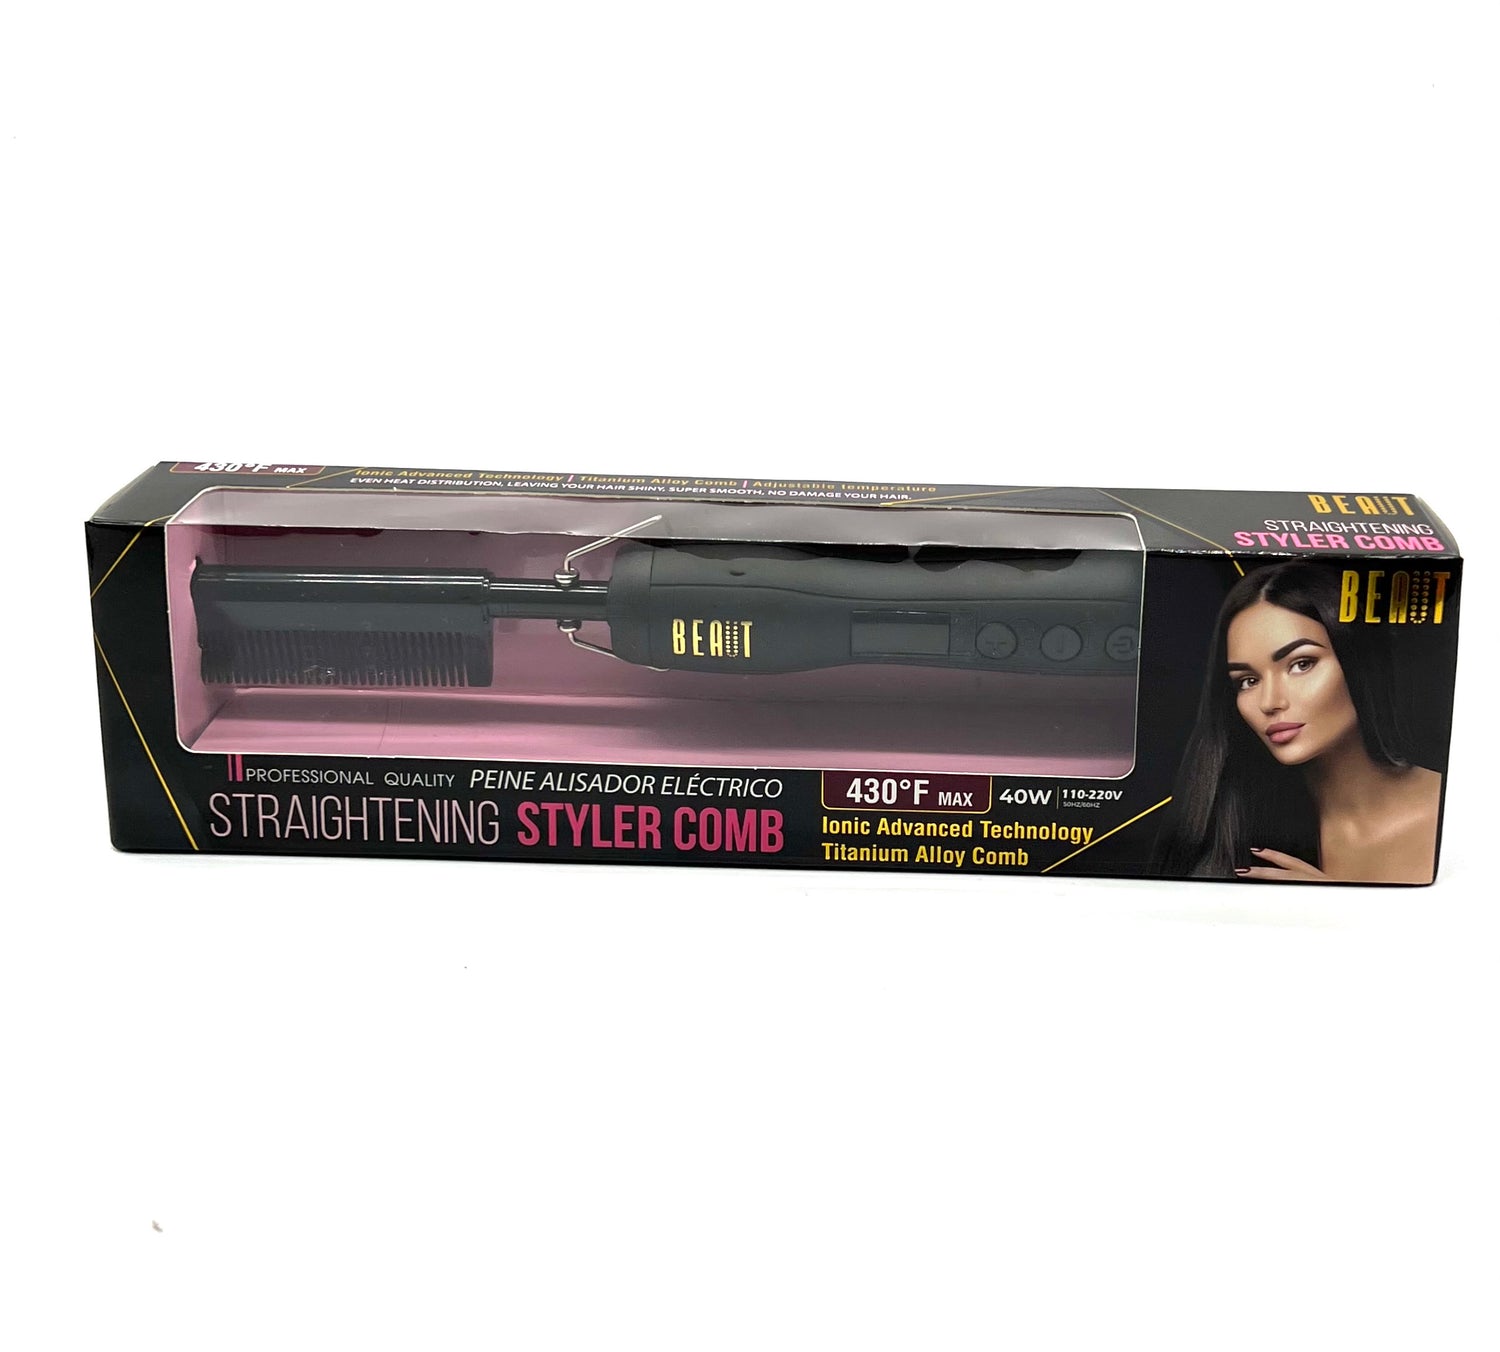 BEAUT  Straightening Styler Comb 430 °F max - VIP Extensions